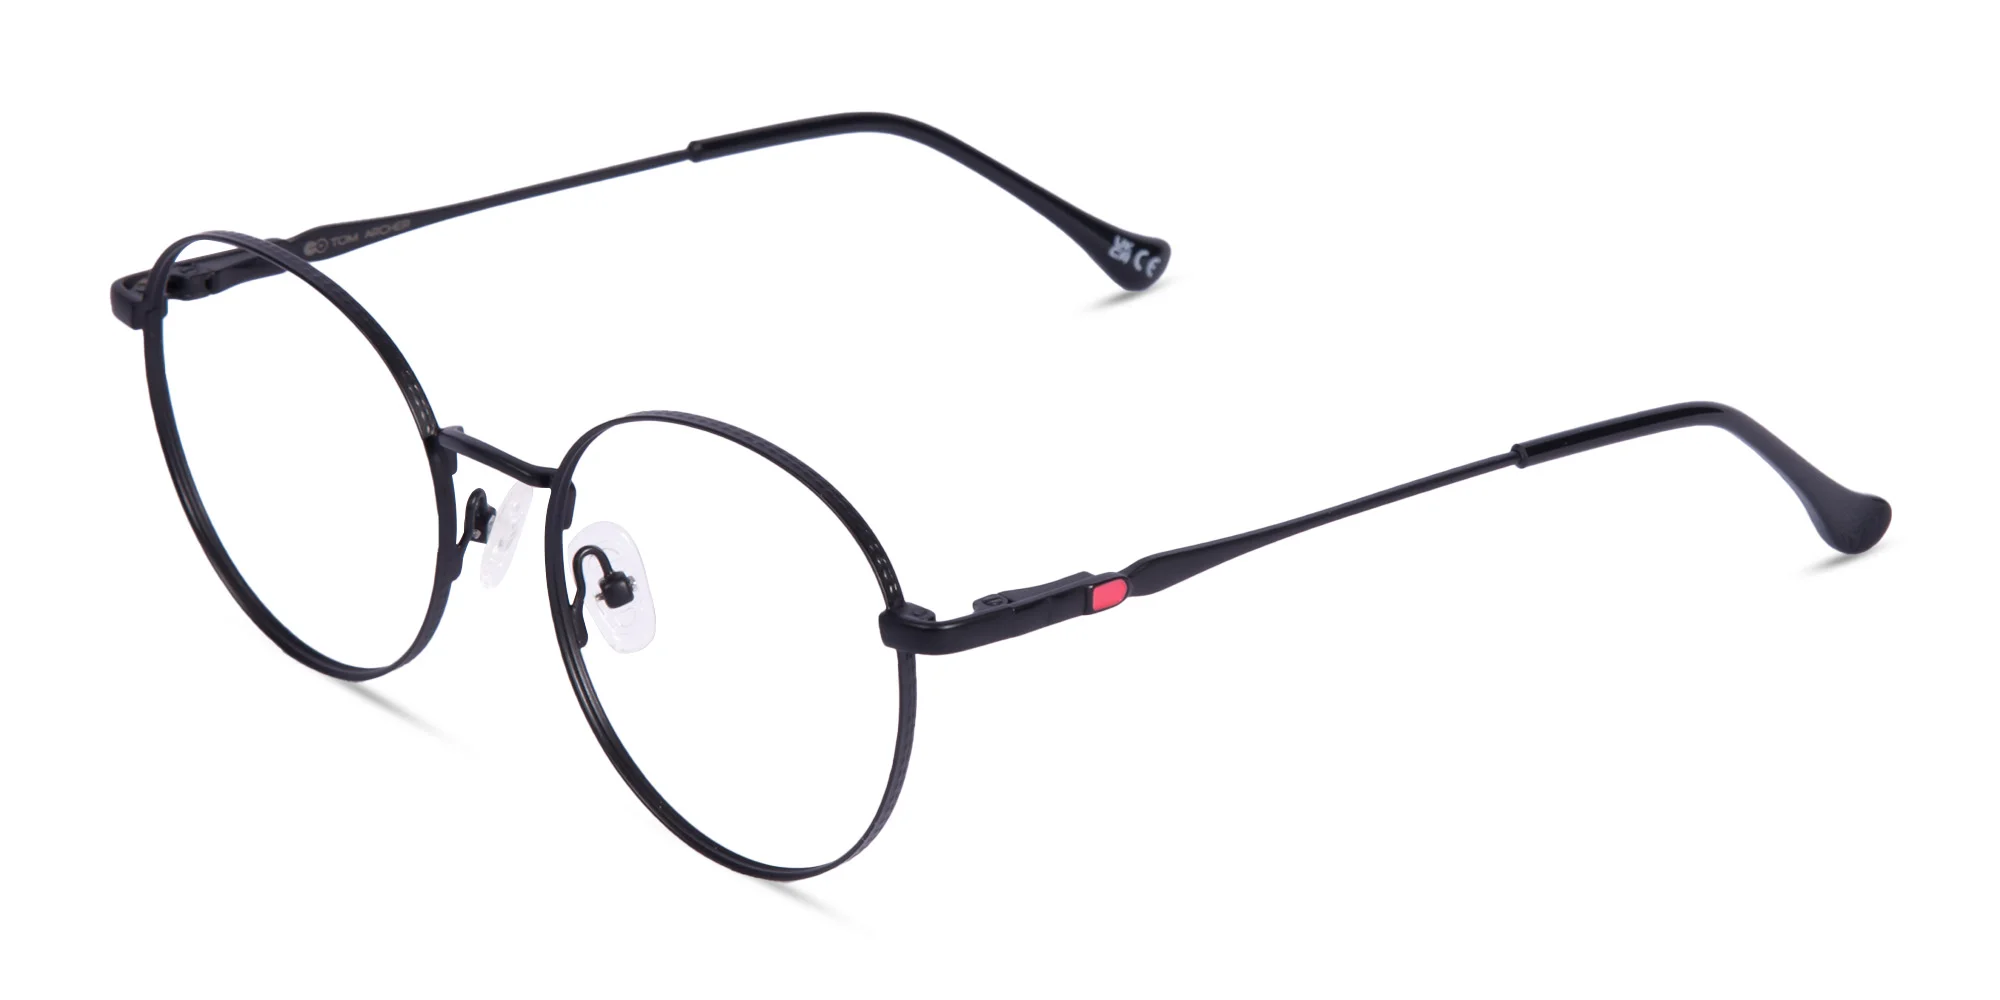 Wire Rimmed Spectacles